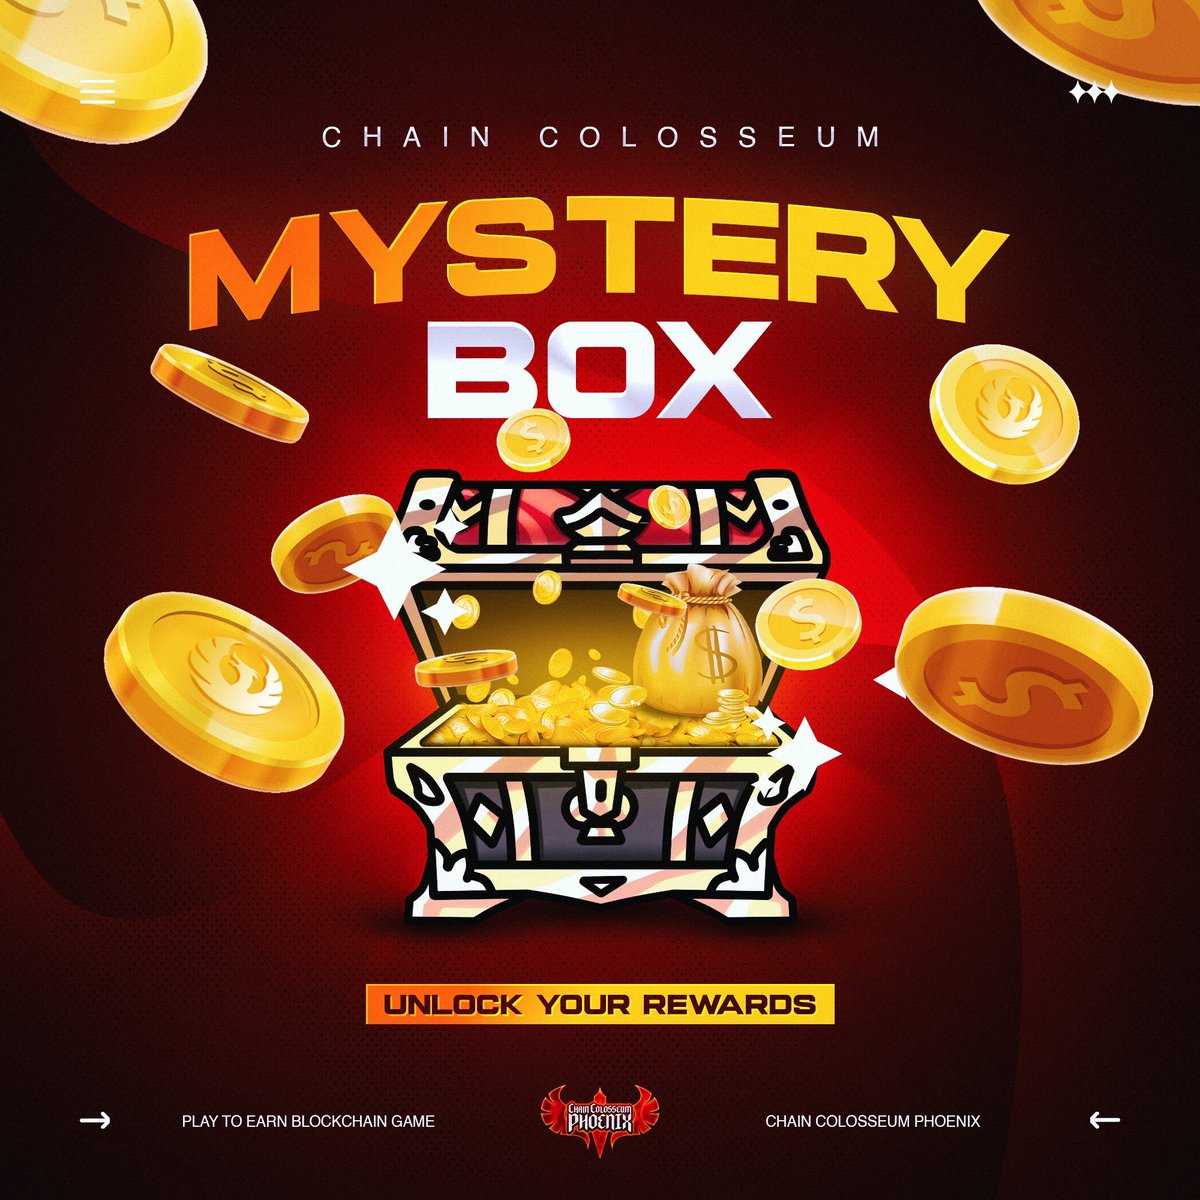 Have you got lucky with a Mystery Box yet? Boost your Hero's Luck value to get awesome items! Play the game, get your boxes, from Whitelists, $CCP, gems or injury repair items! Higher Rarity > Better Rewards. PREMIUM PASS mint is approaching, Notis ON🔔